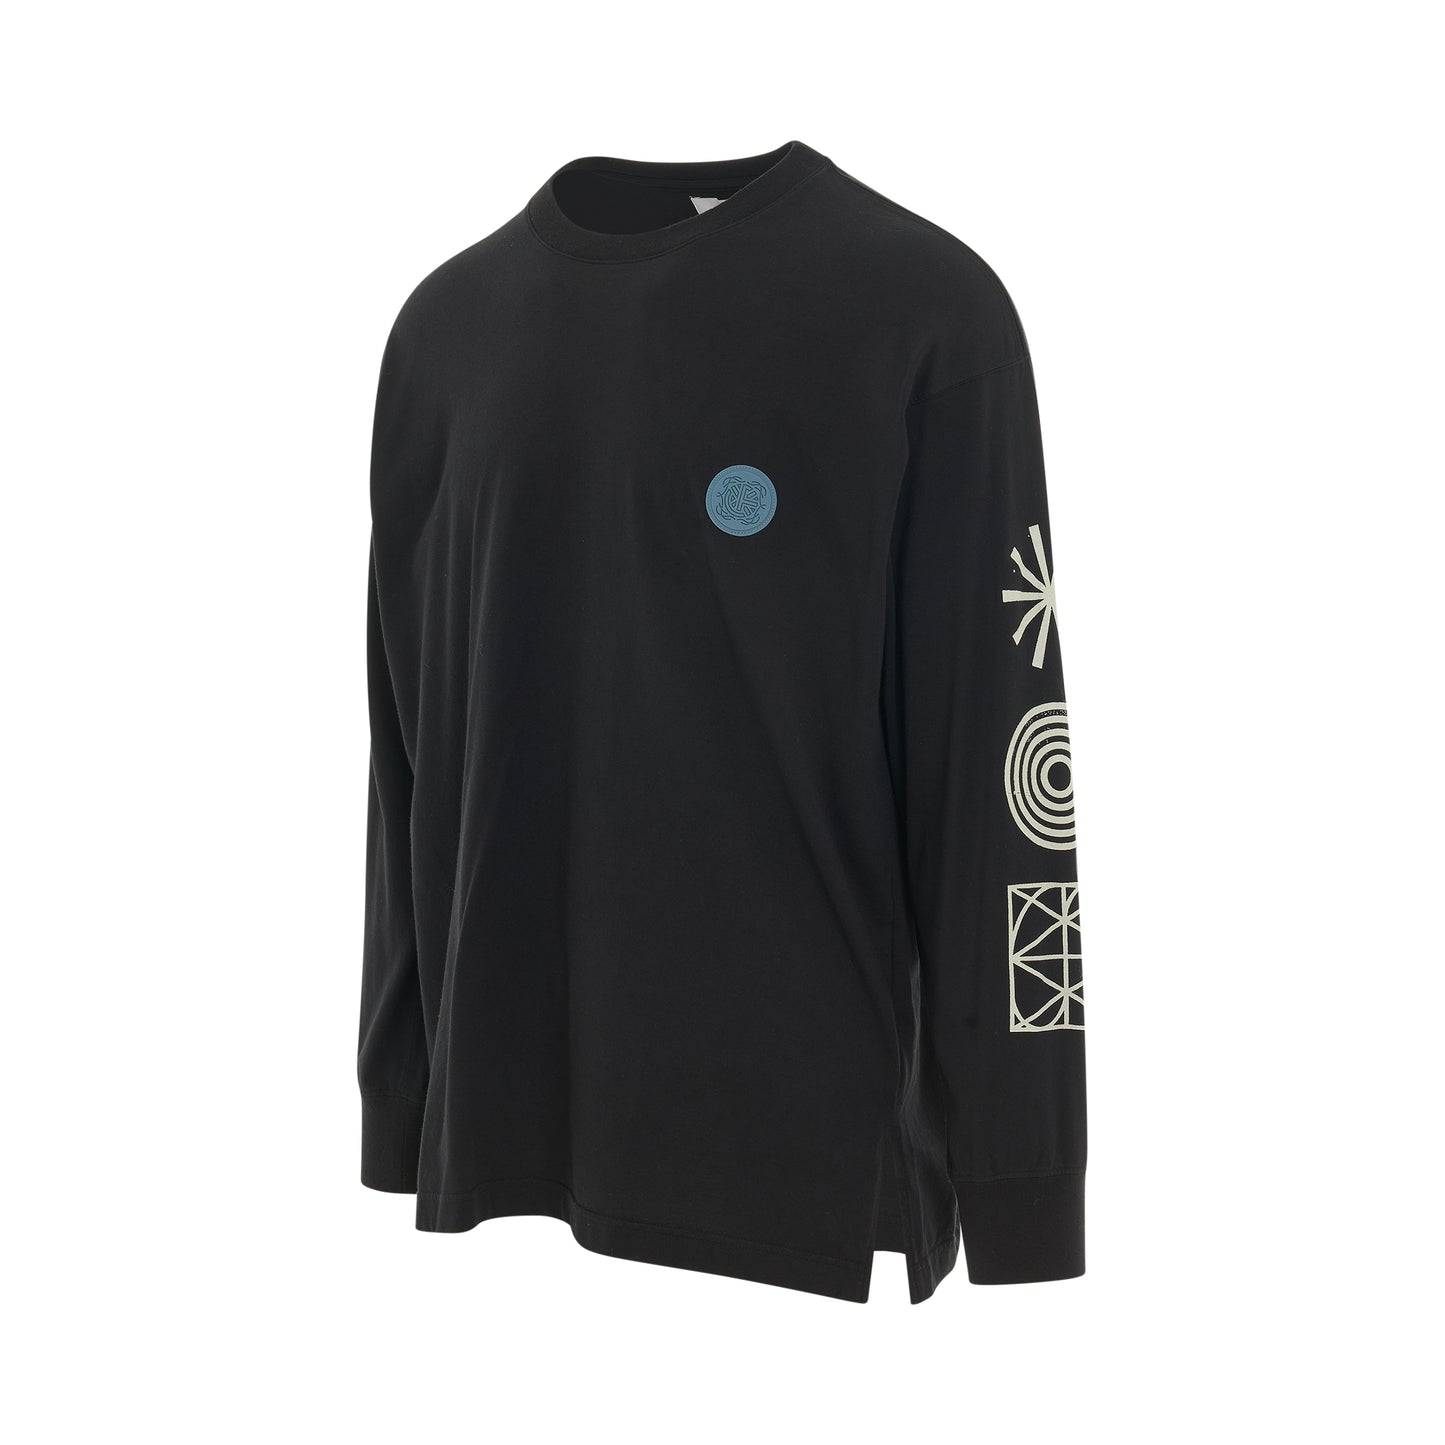 Anarchy Long Sleeve T-Shirt in Black